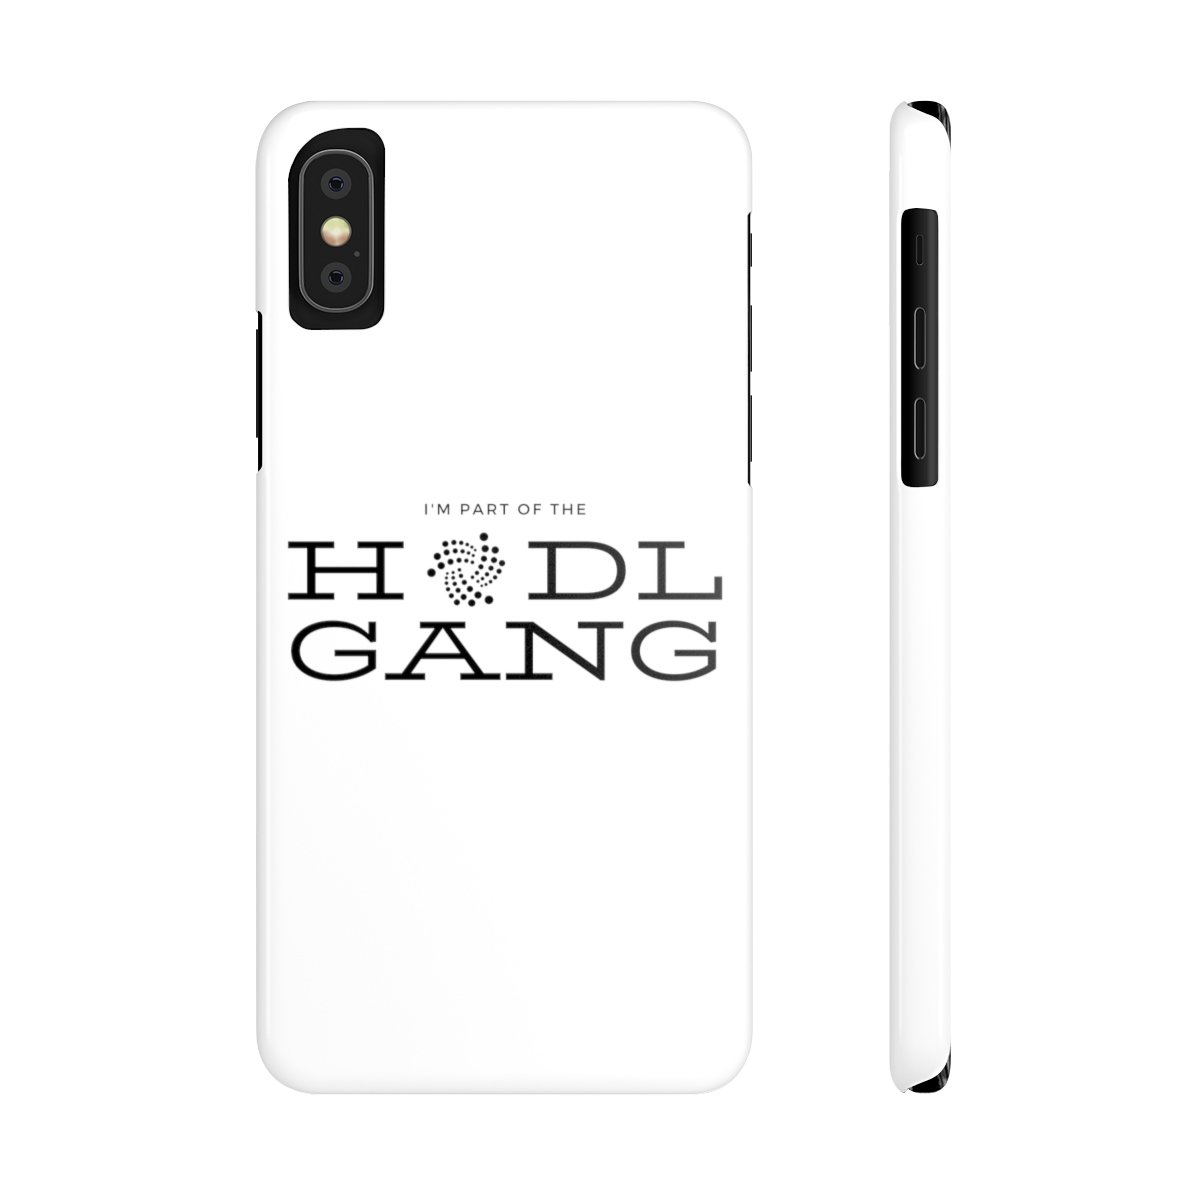 Hodl gang (Iota) - Case Mate Slim Phone Cases TCP1607 iPhone XS Official Crypto  Merch